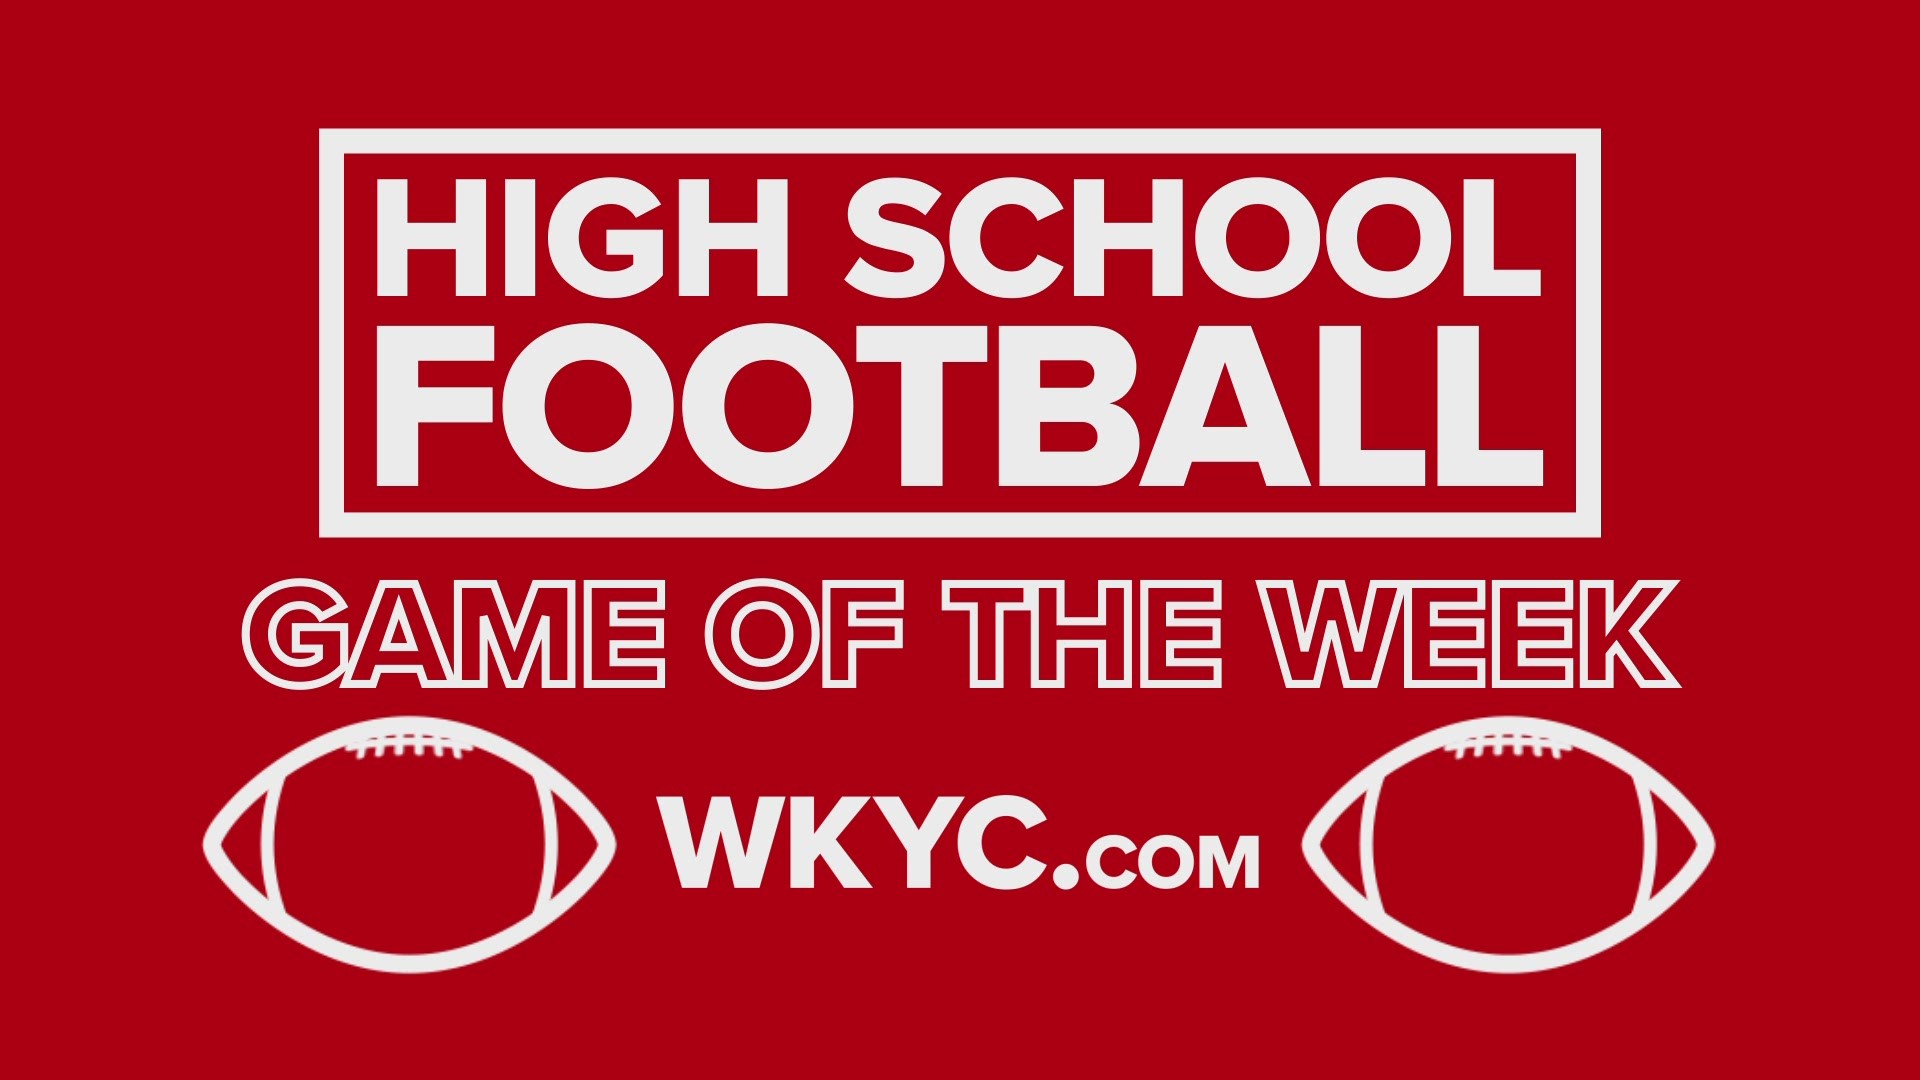 Kirtland outlasts Mogadore 20-14 in WKYC.com's High School Football Playoff Game of the Week